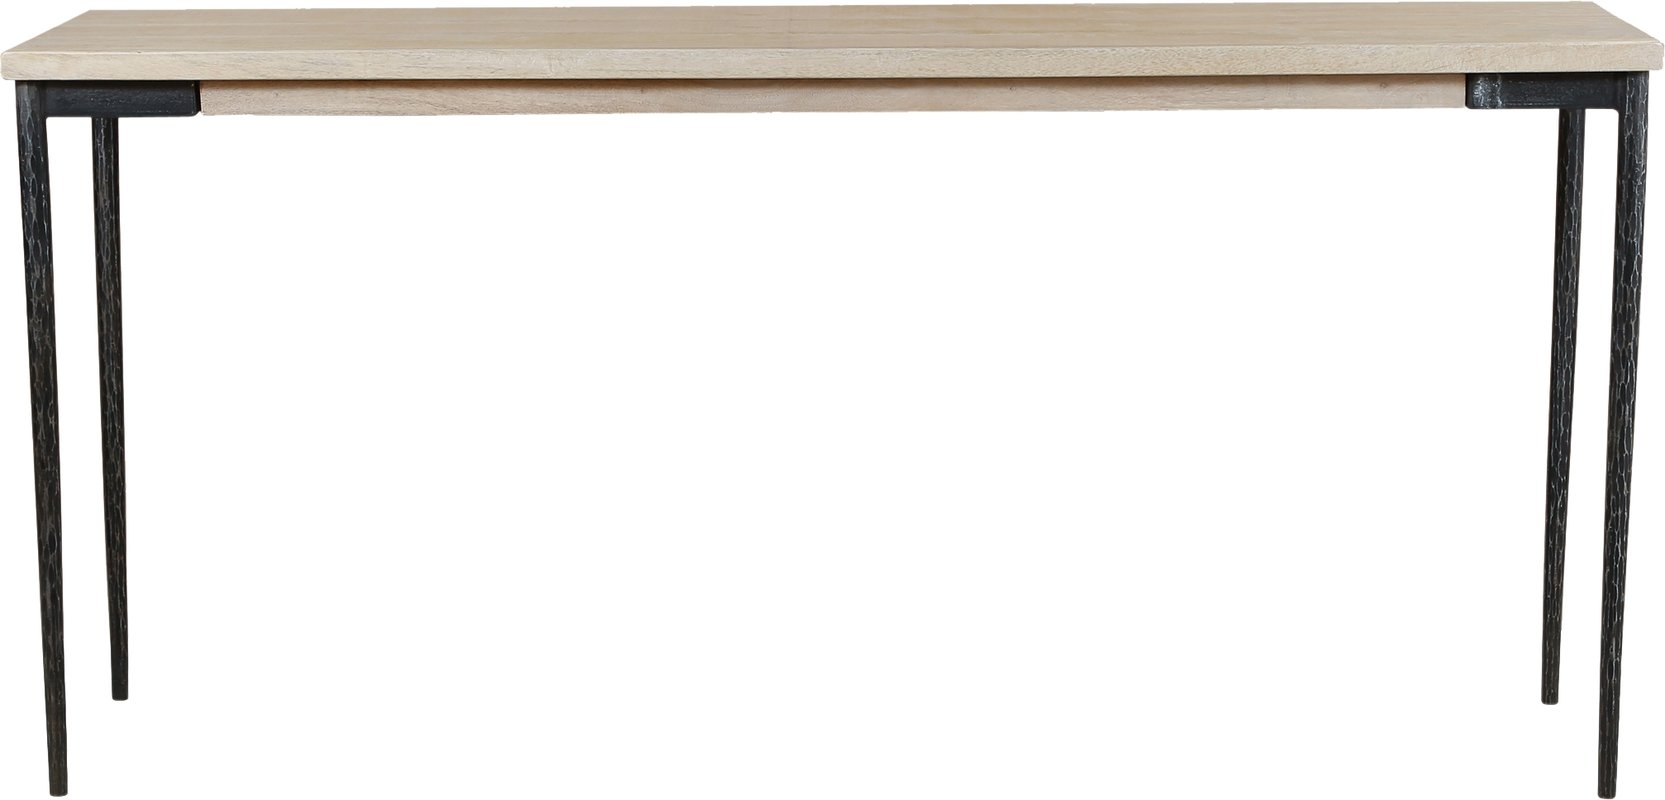 SANDS CONSOLE TABLE - Image 0